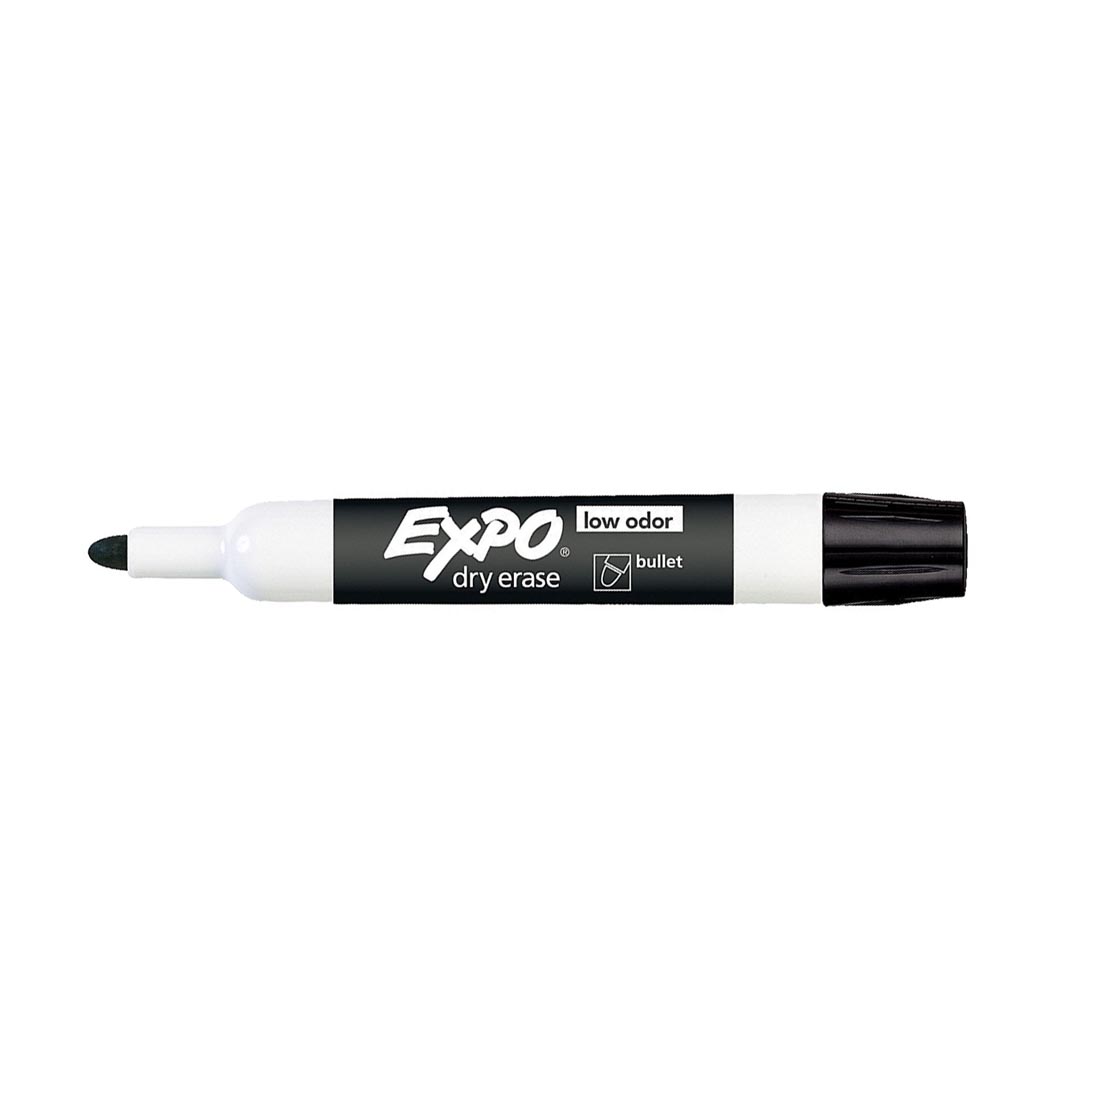 Black Expo Low Odor Bullet Tip Dry Erase Marker with its cap on the opposite end